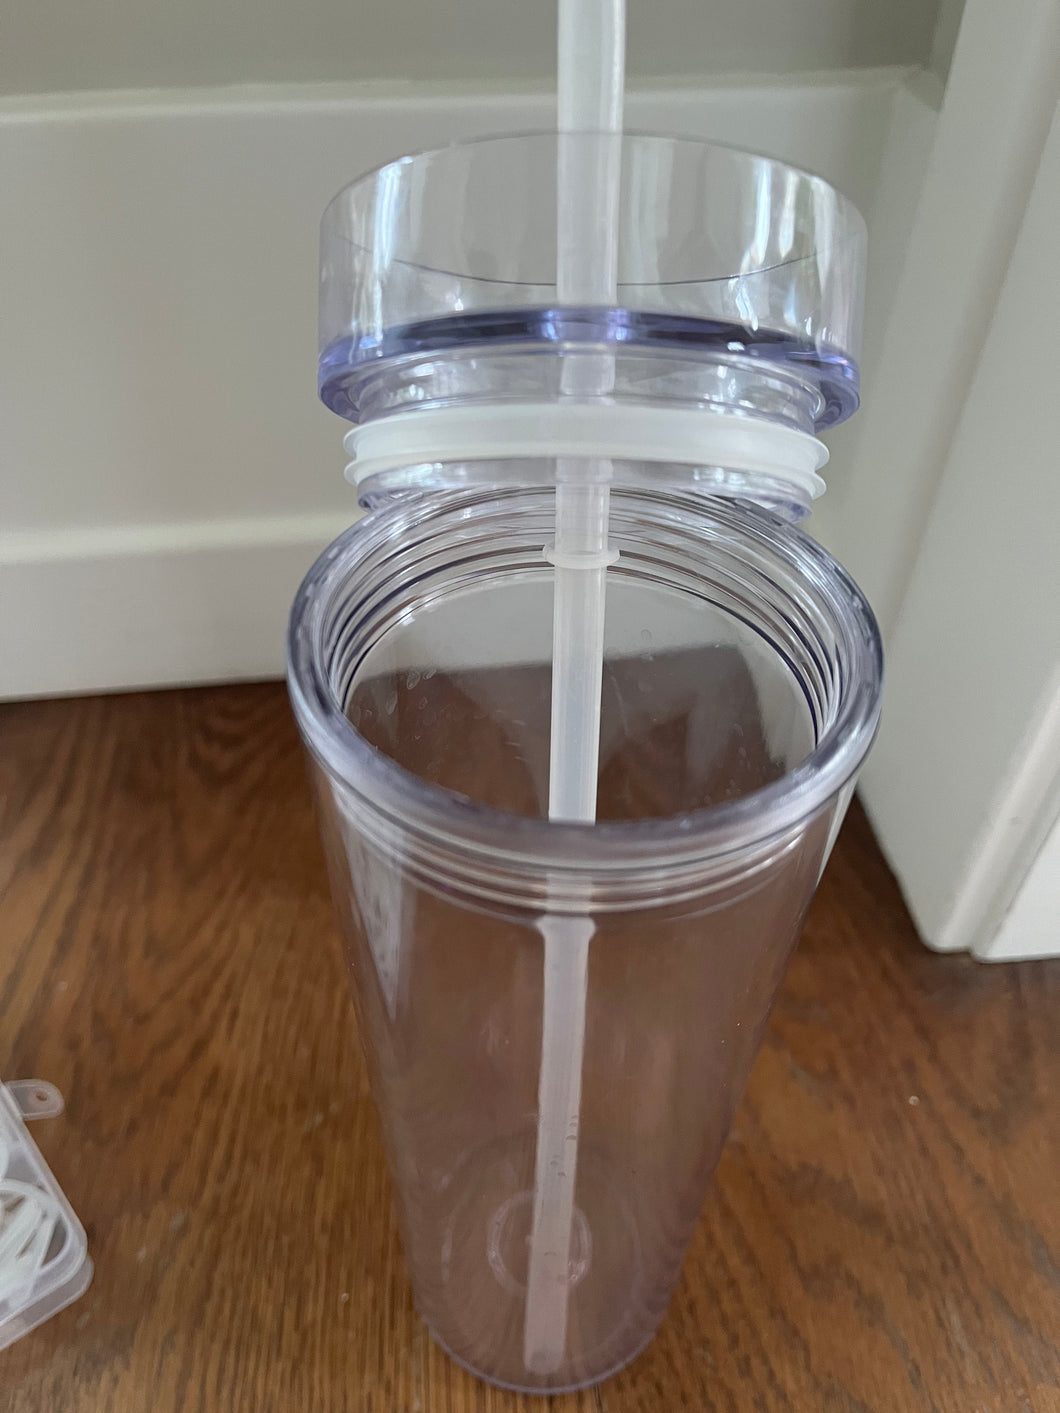 Clear tumbler sitting on a wood surface with the lid partially off, showing the rubber seal that holds the lid in place.